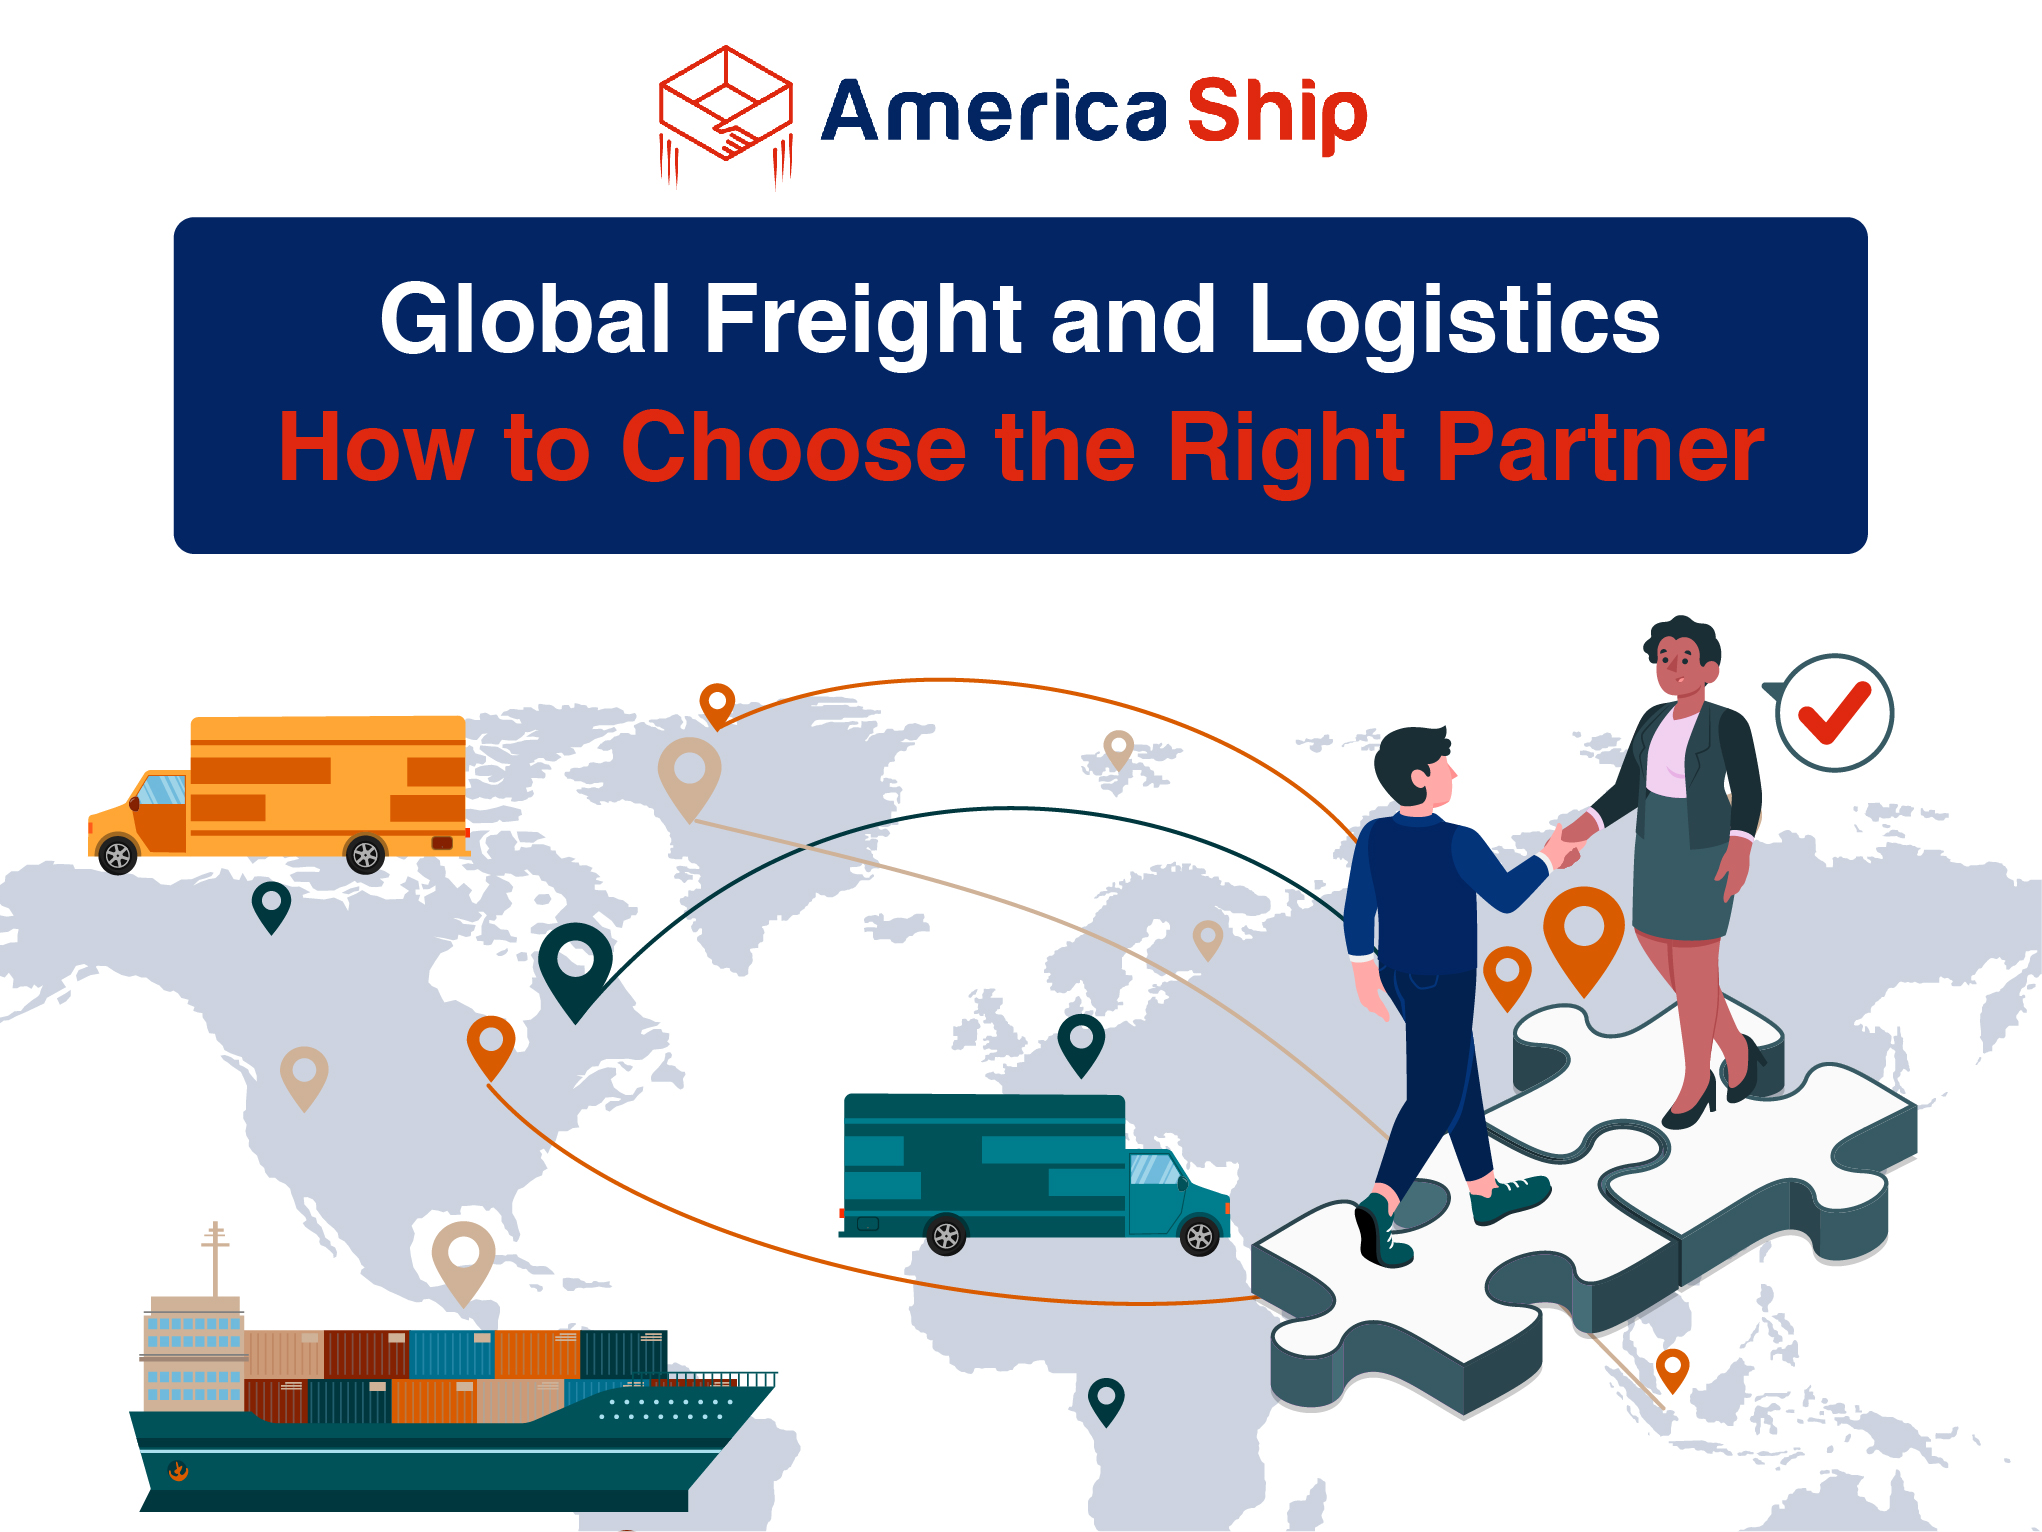 Global Freight and Logistics: How to Choose the Right Partner